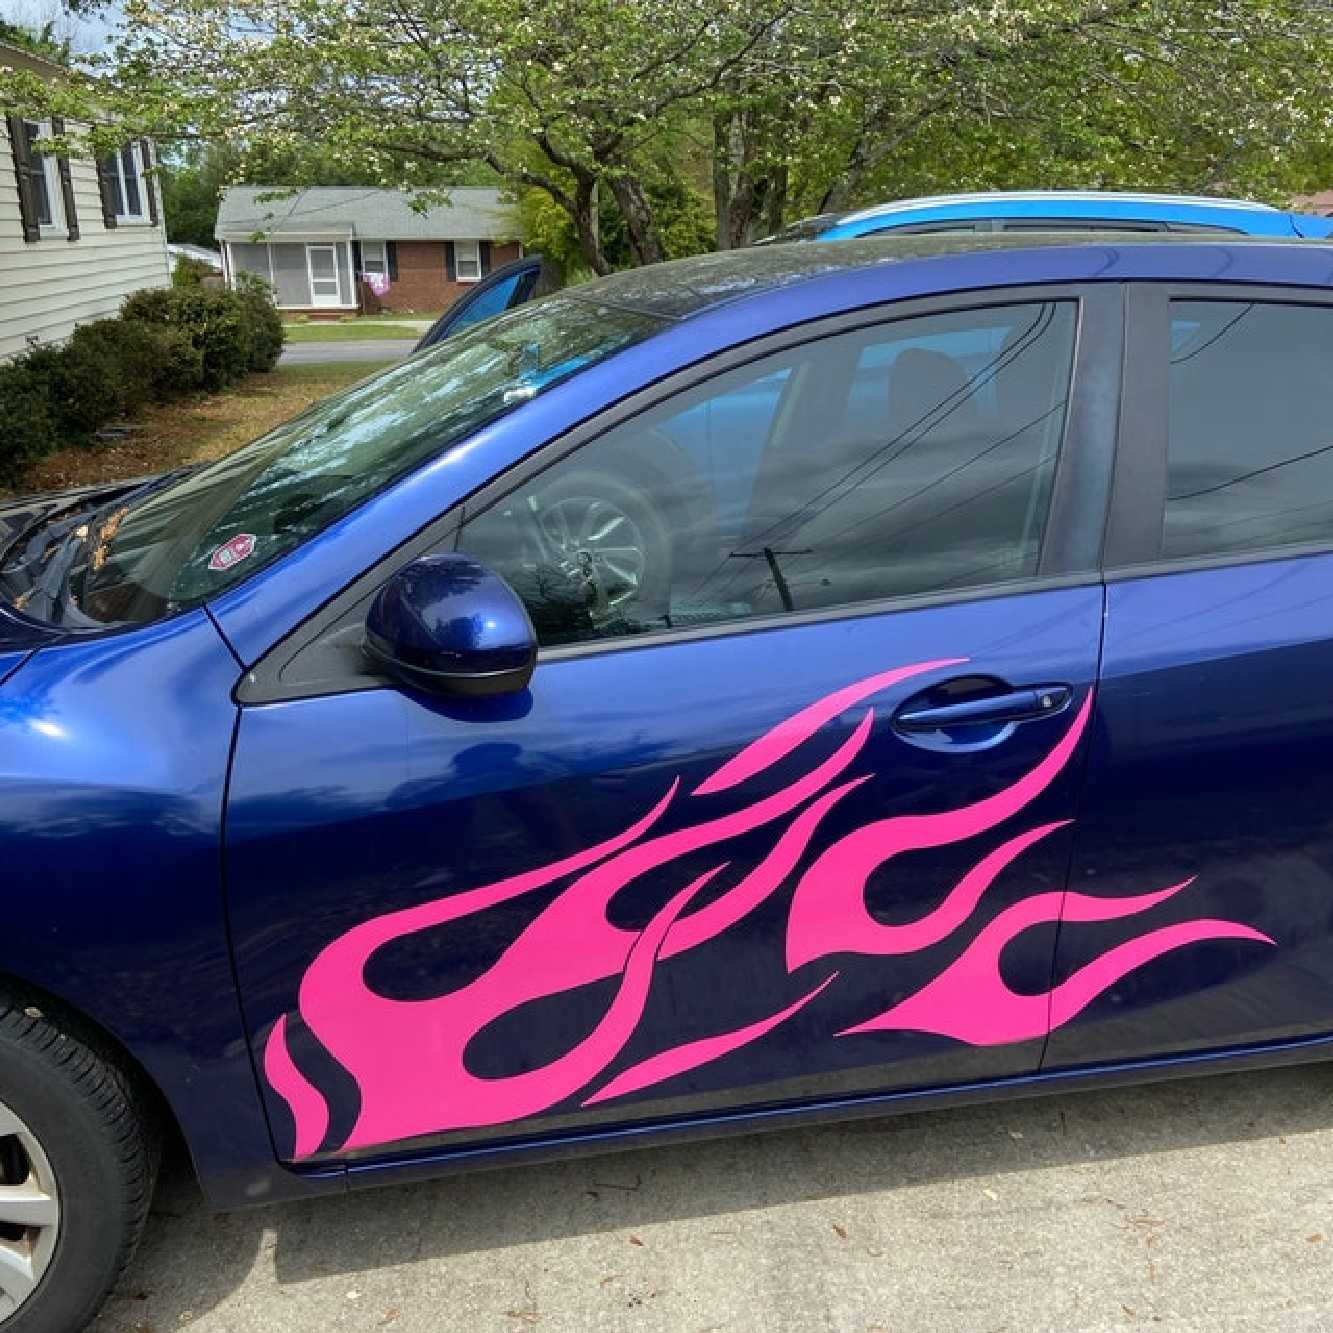 Flame decals on side of car